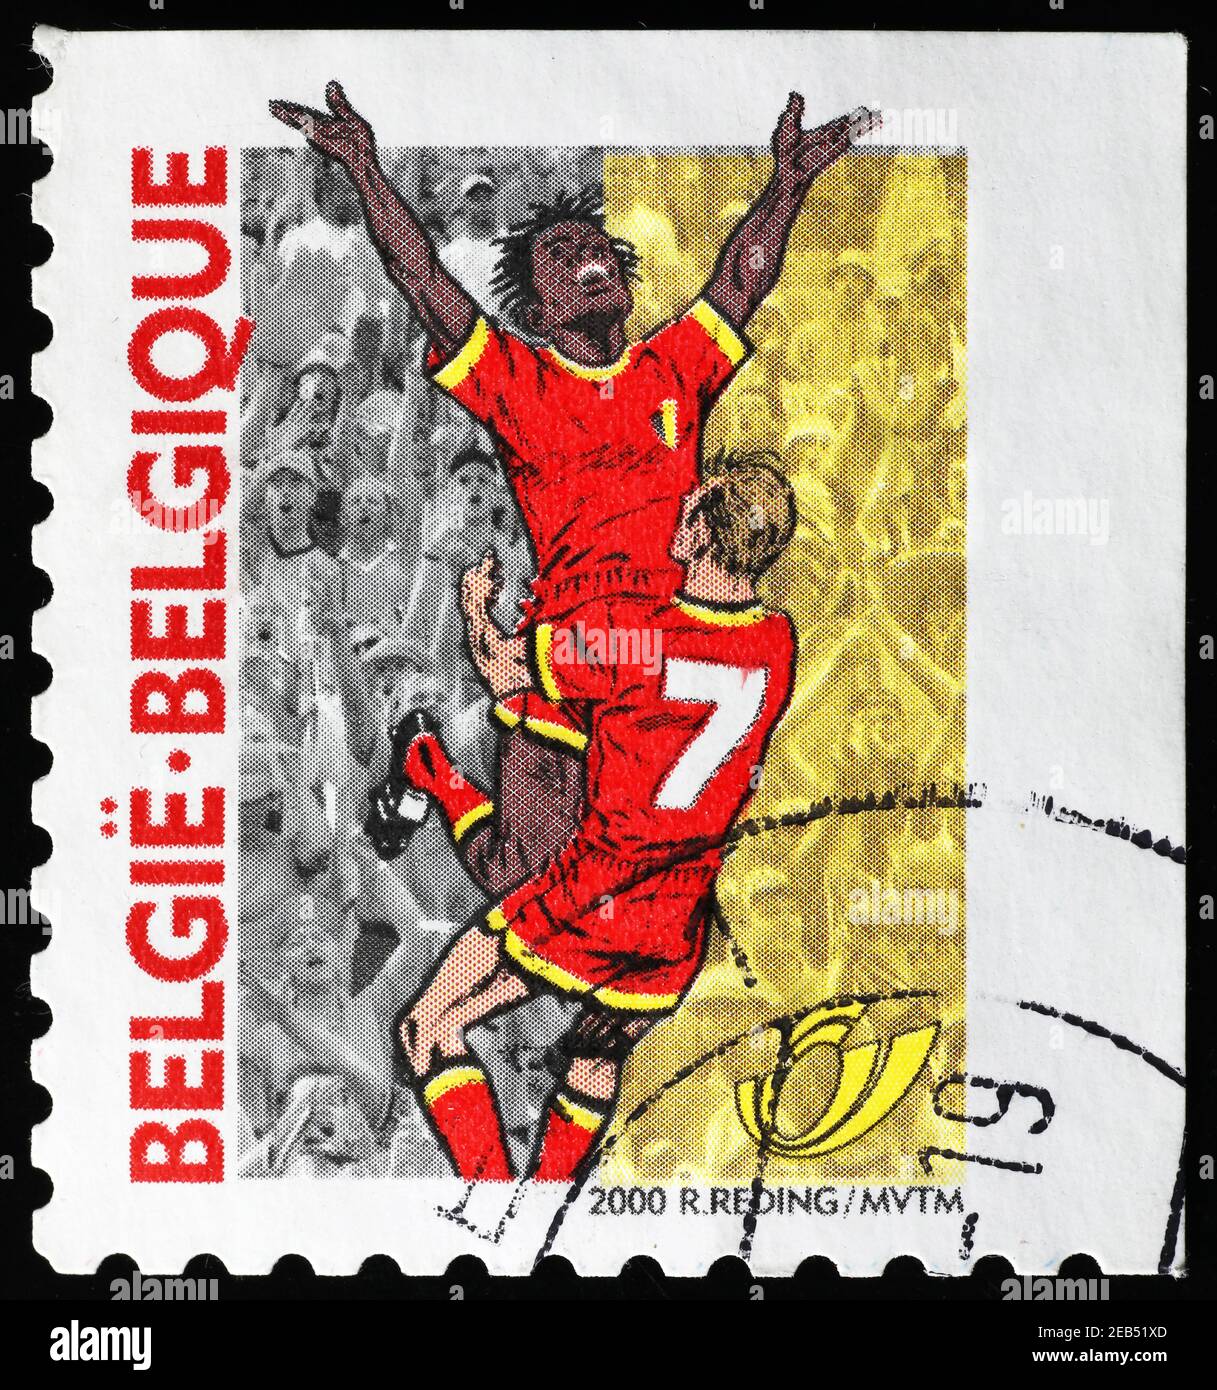 Belgian national team celebrated on postage stamp Stock Photo